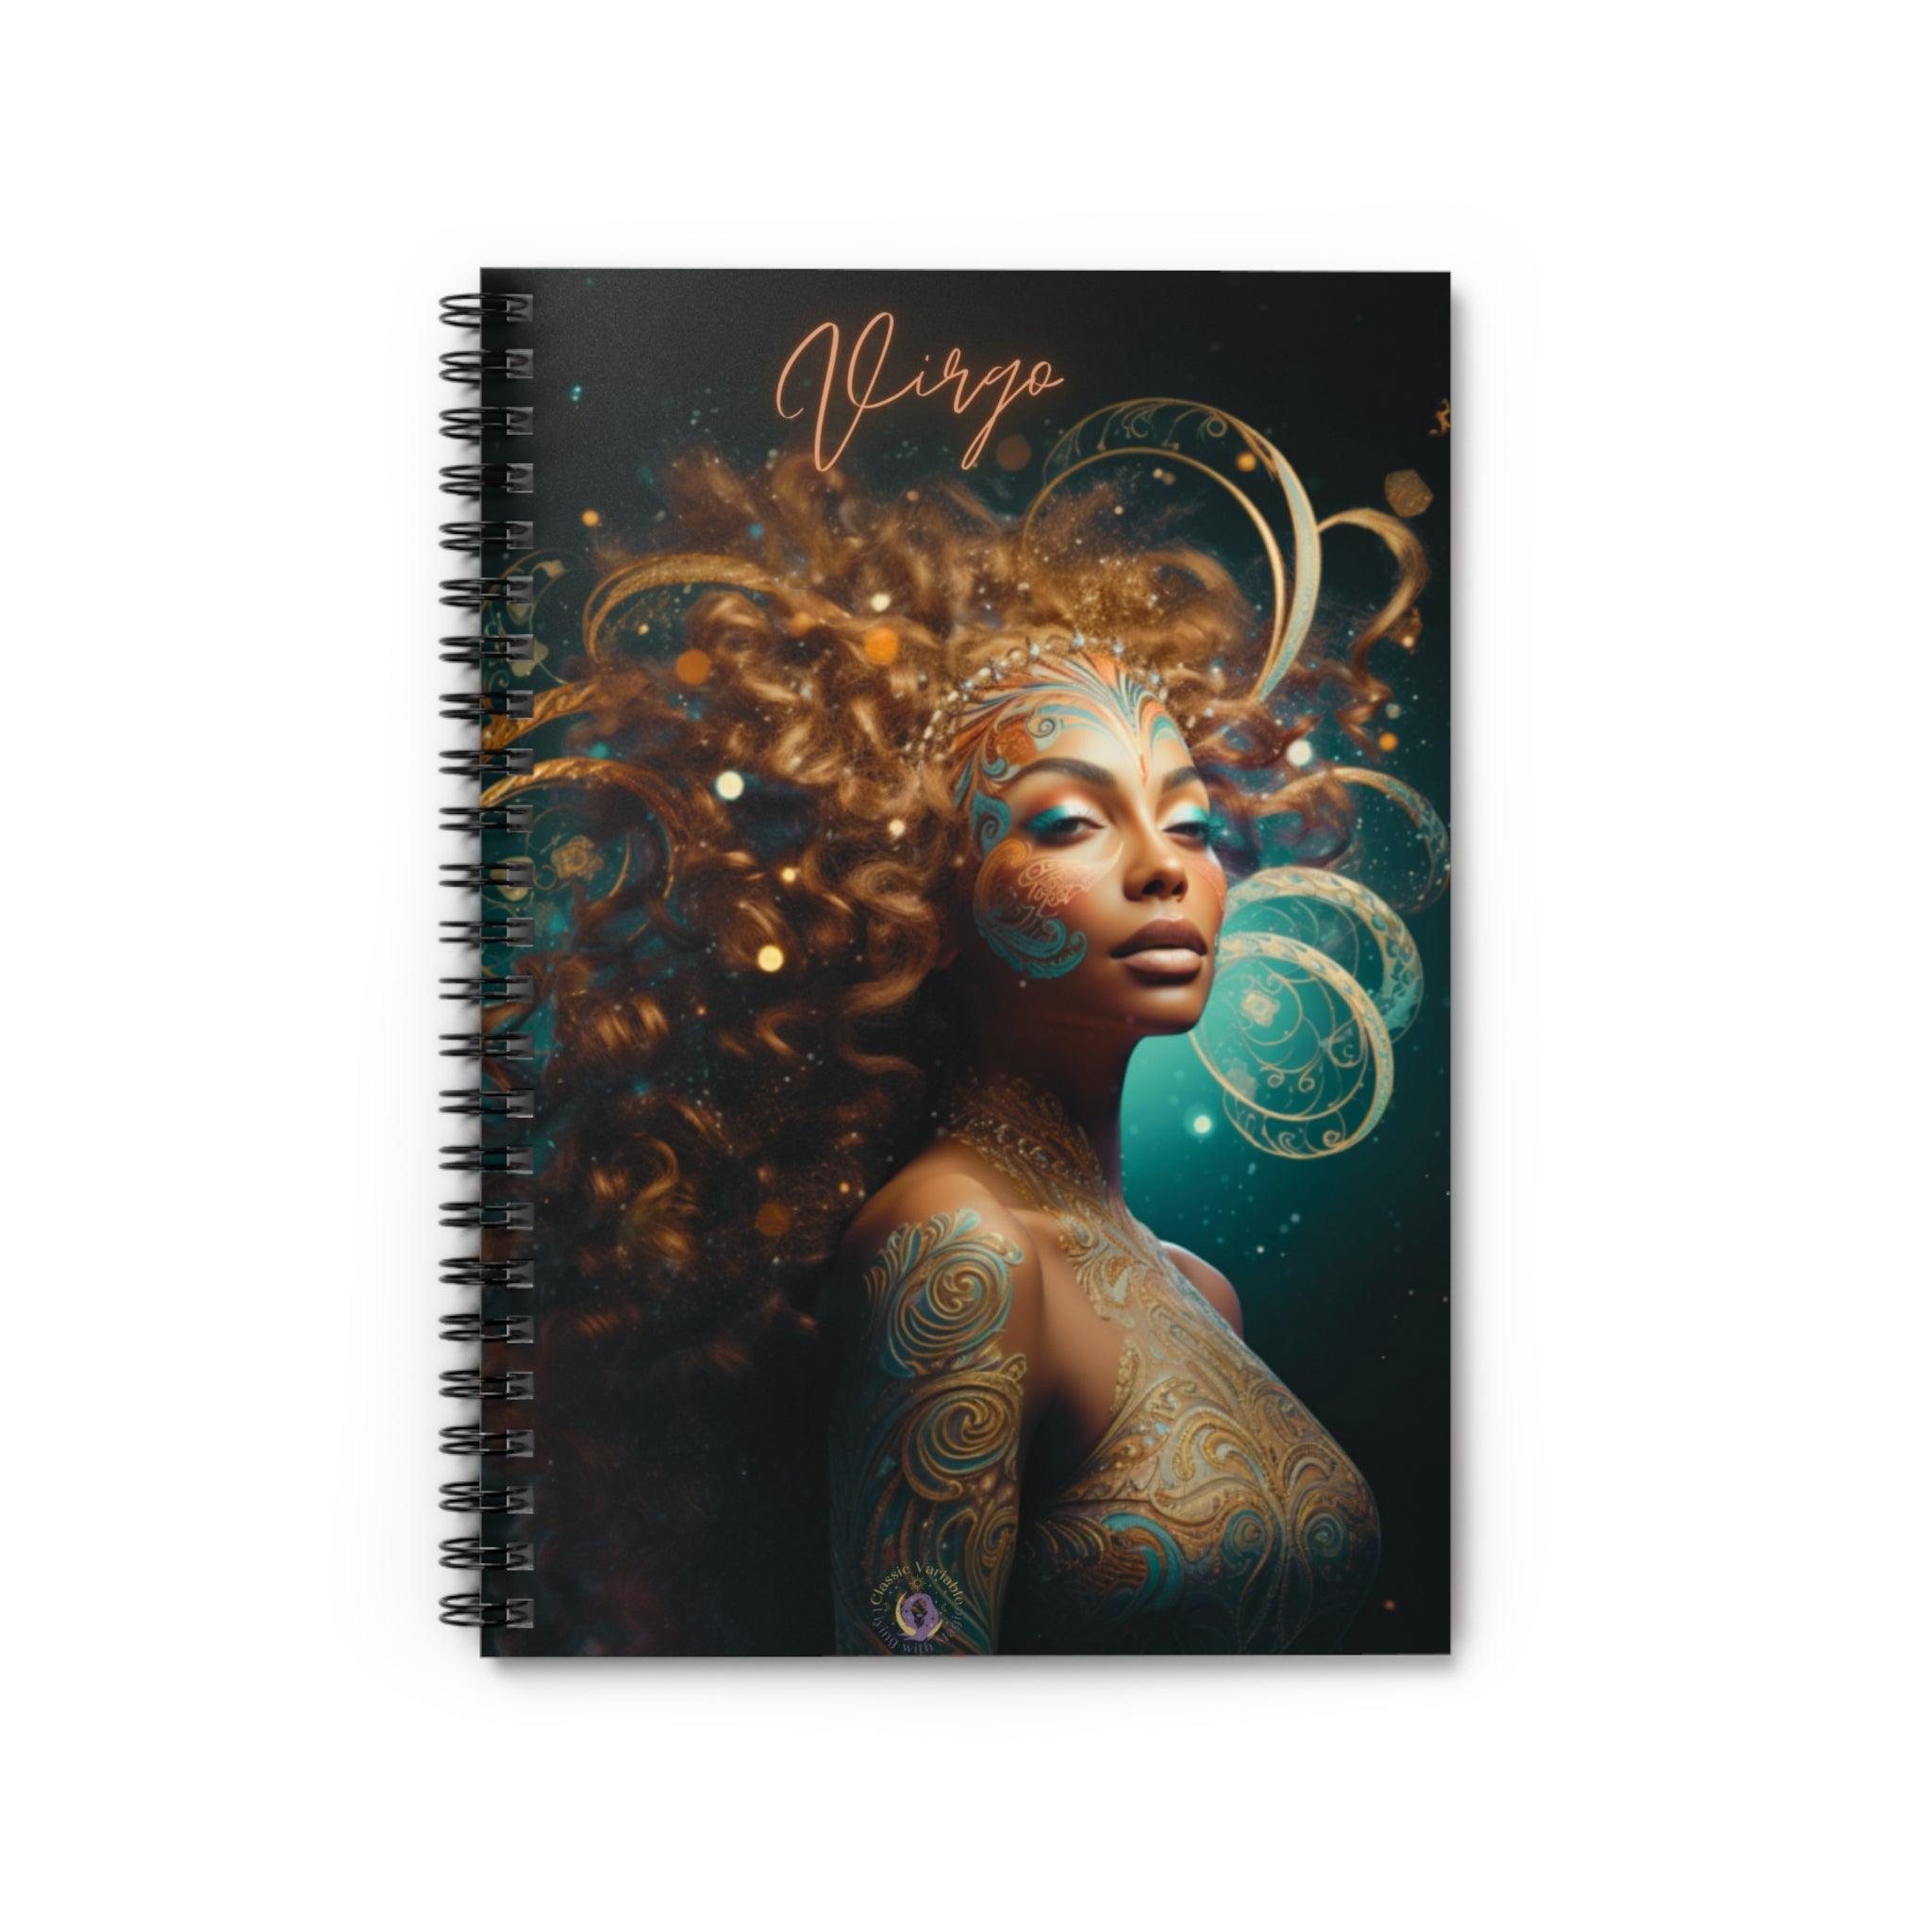 Virgo Spiral Notebook - Ruled Line - Classic Variable